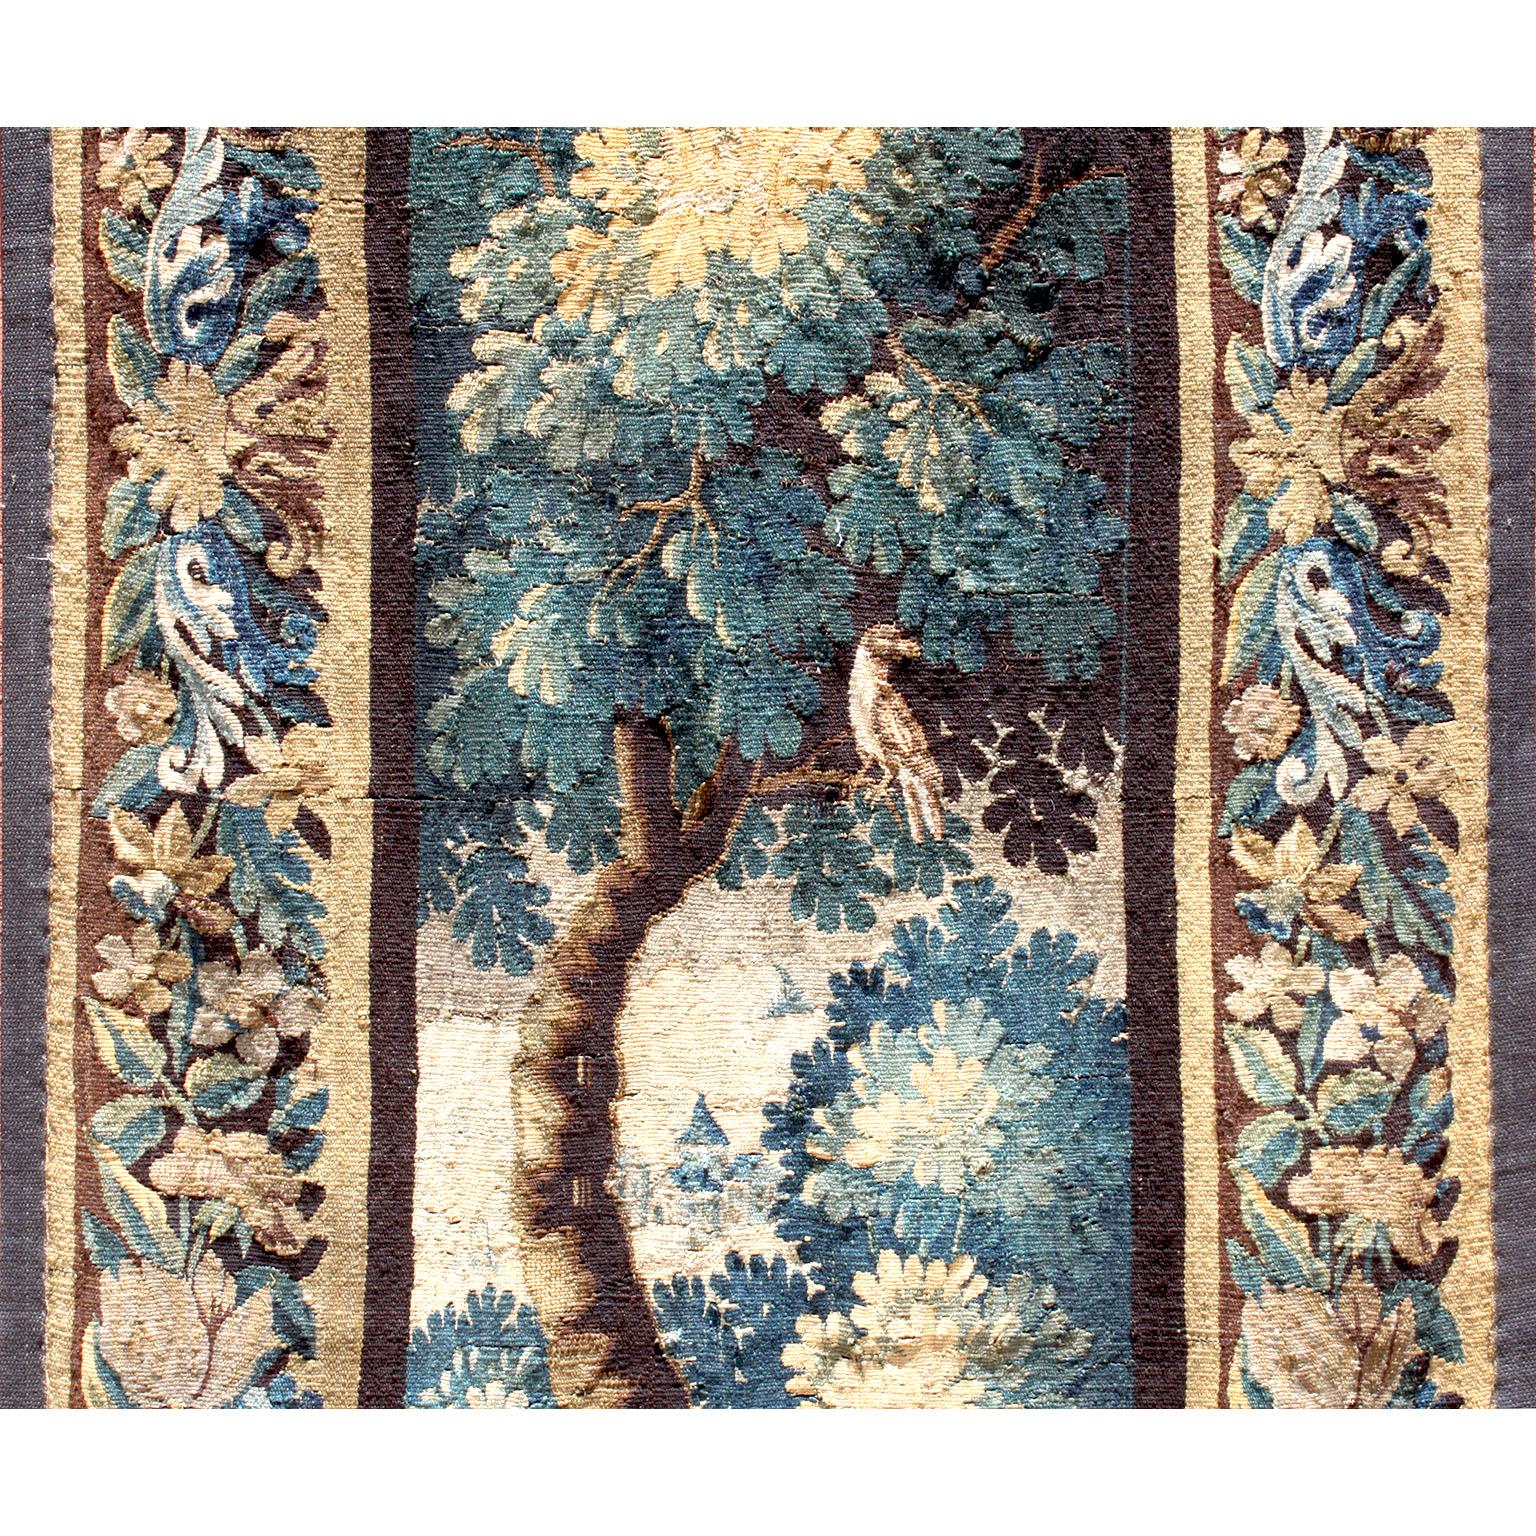 Baroque Flemish 18th-19th Century Verdure Landscape Tapestry Panel Centered with a Tree For Sale